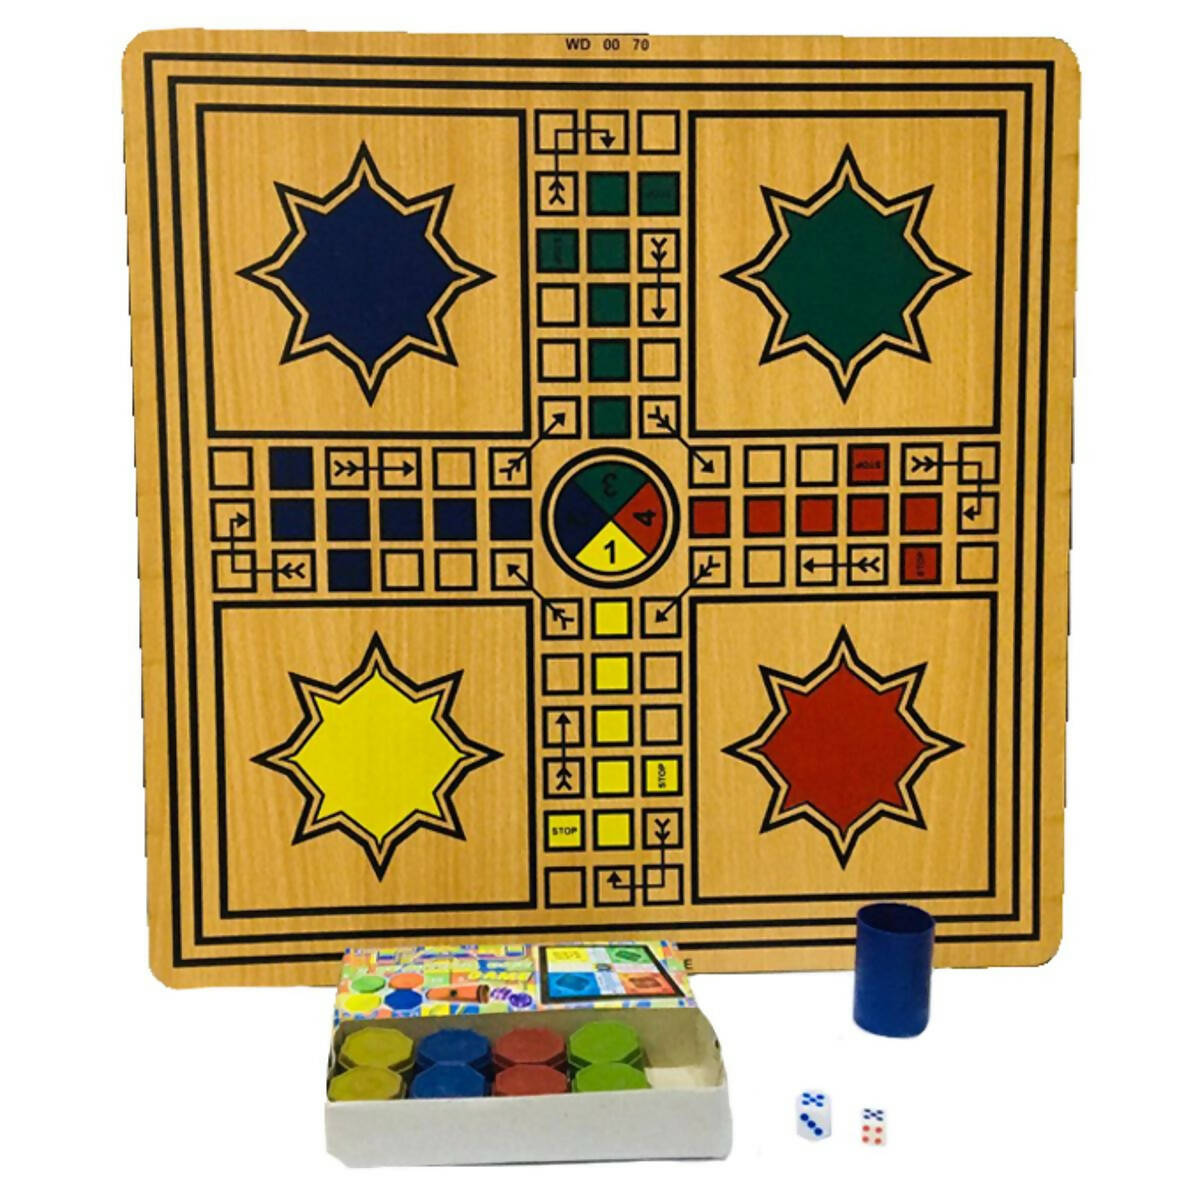 Ludo Family Wooden Baord game 45mm -18 Inches